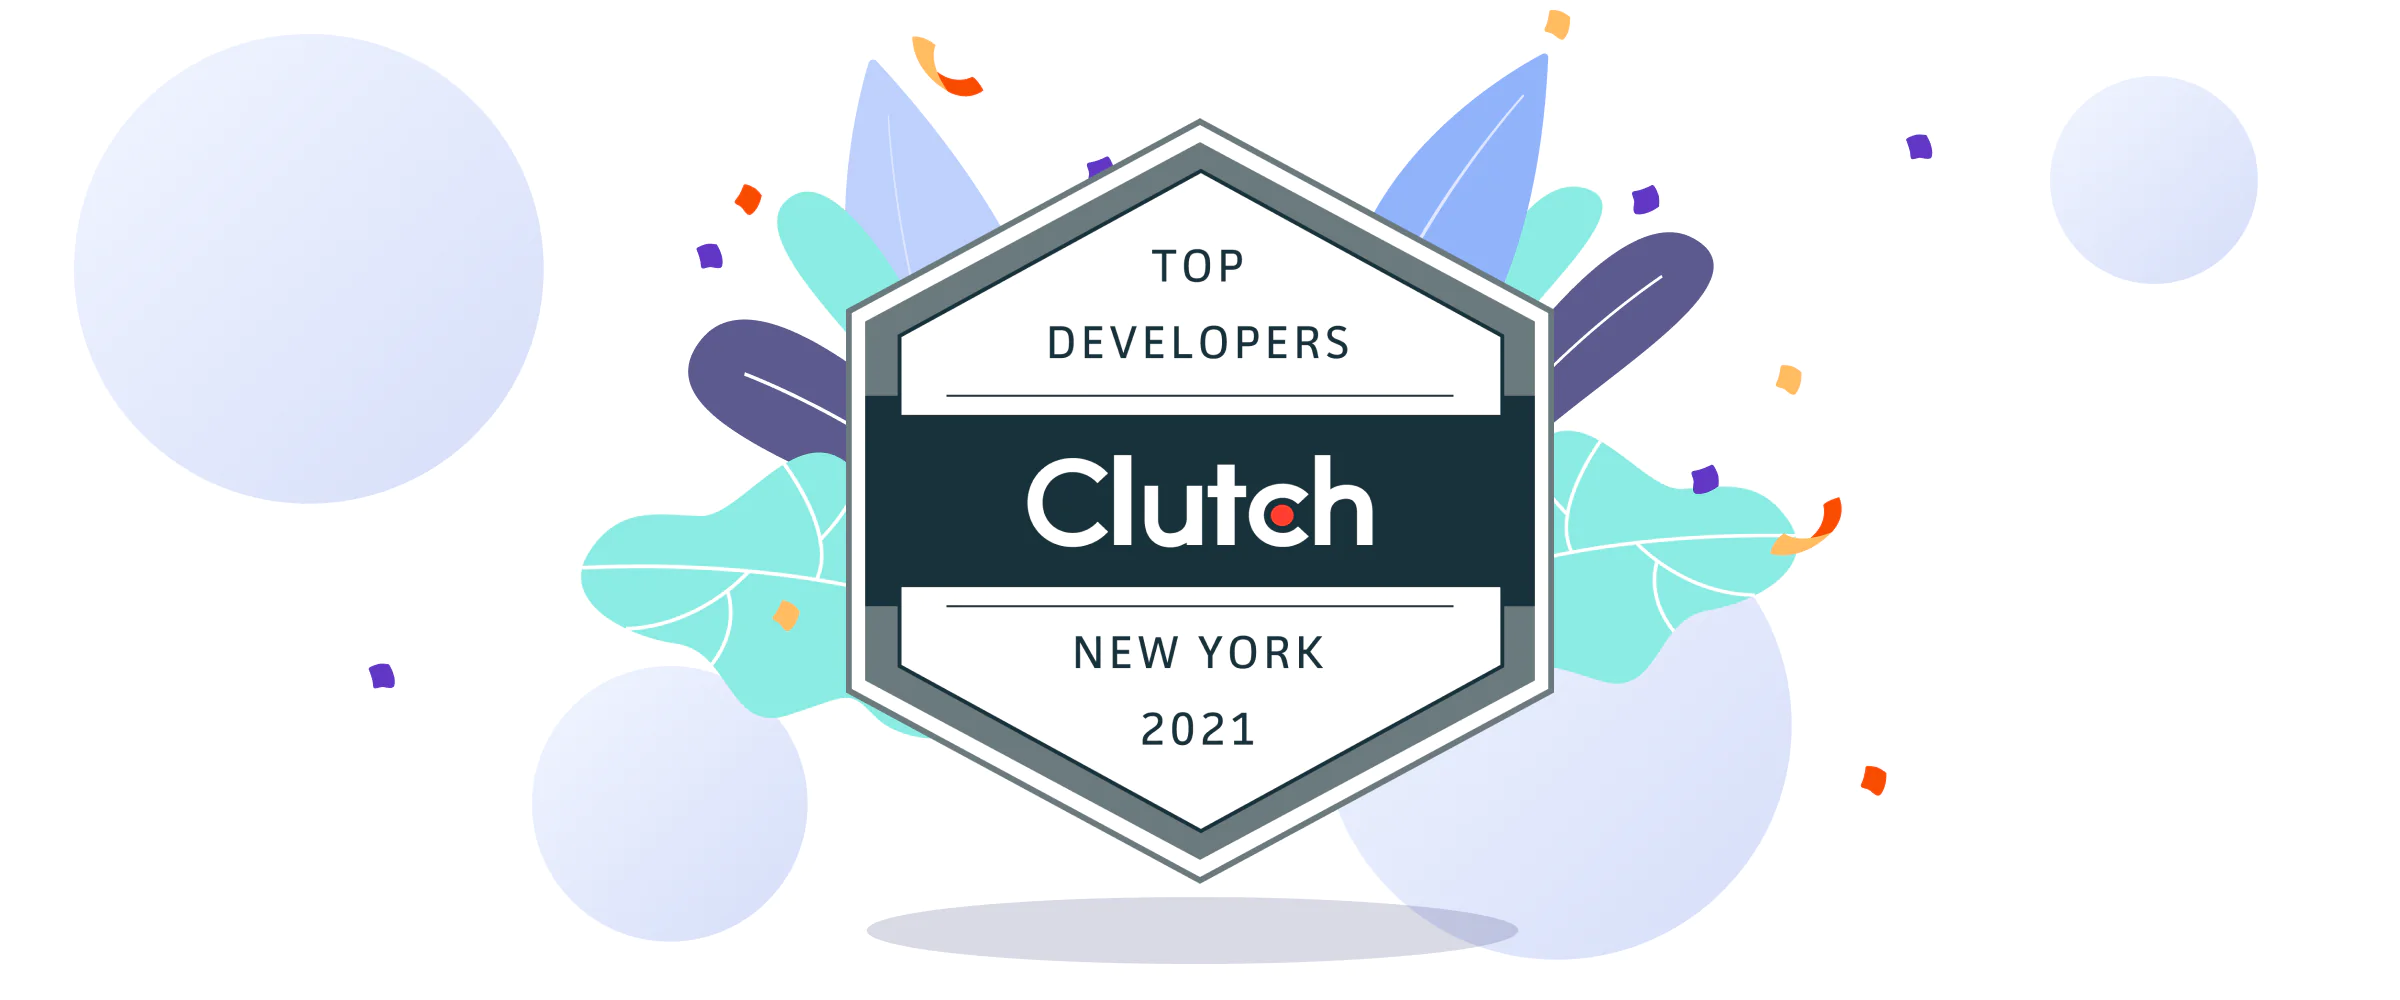 Devtorium one of top Software Developers 2021 awarded by Clutch